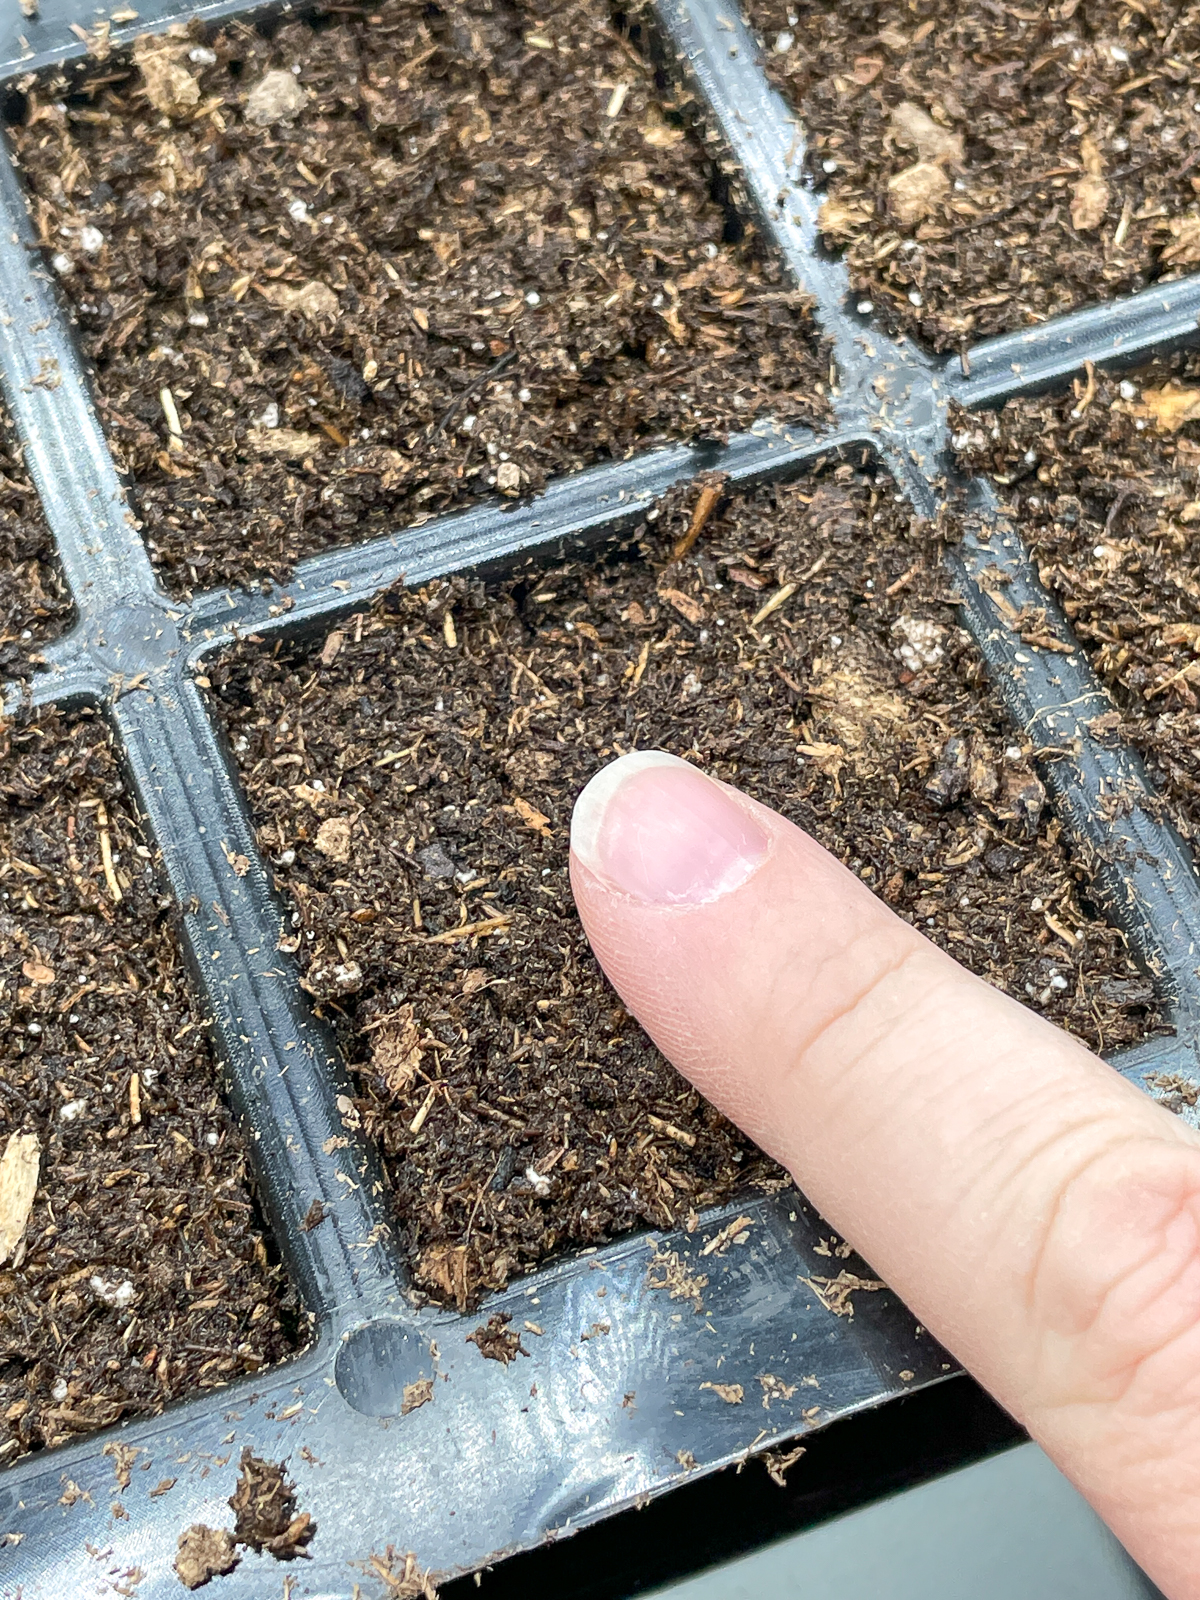 ensuring good soil contact with heuchera seeds by pressing them into the soil with a finger